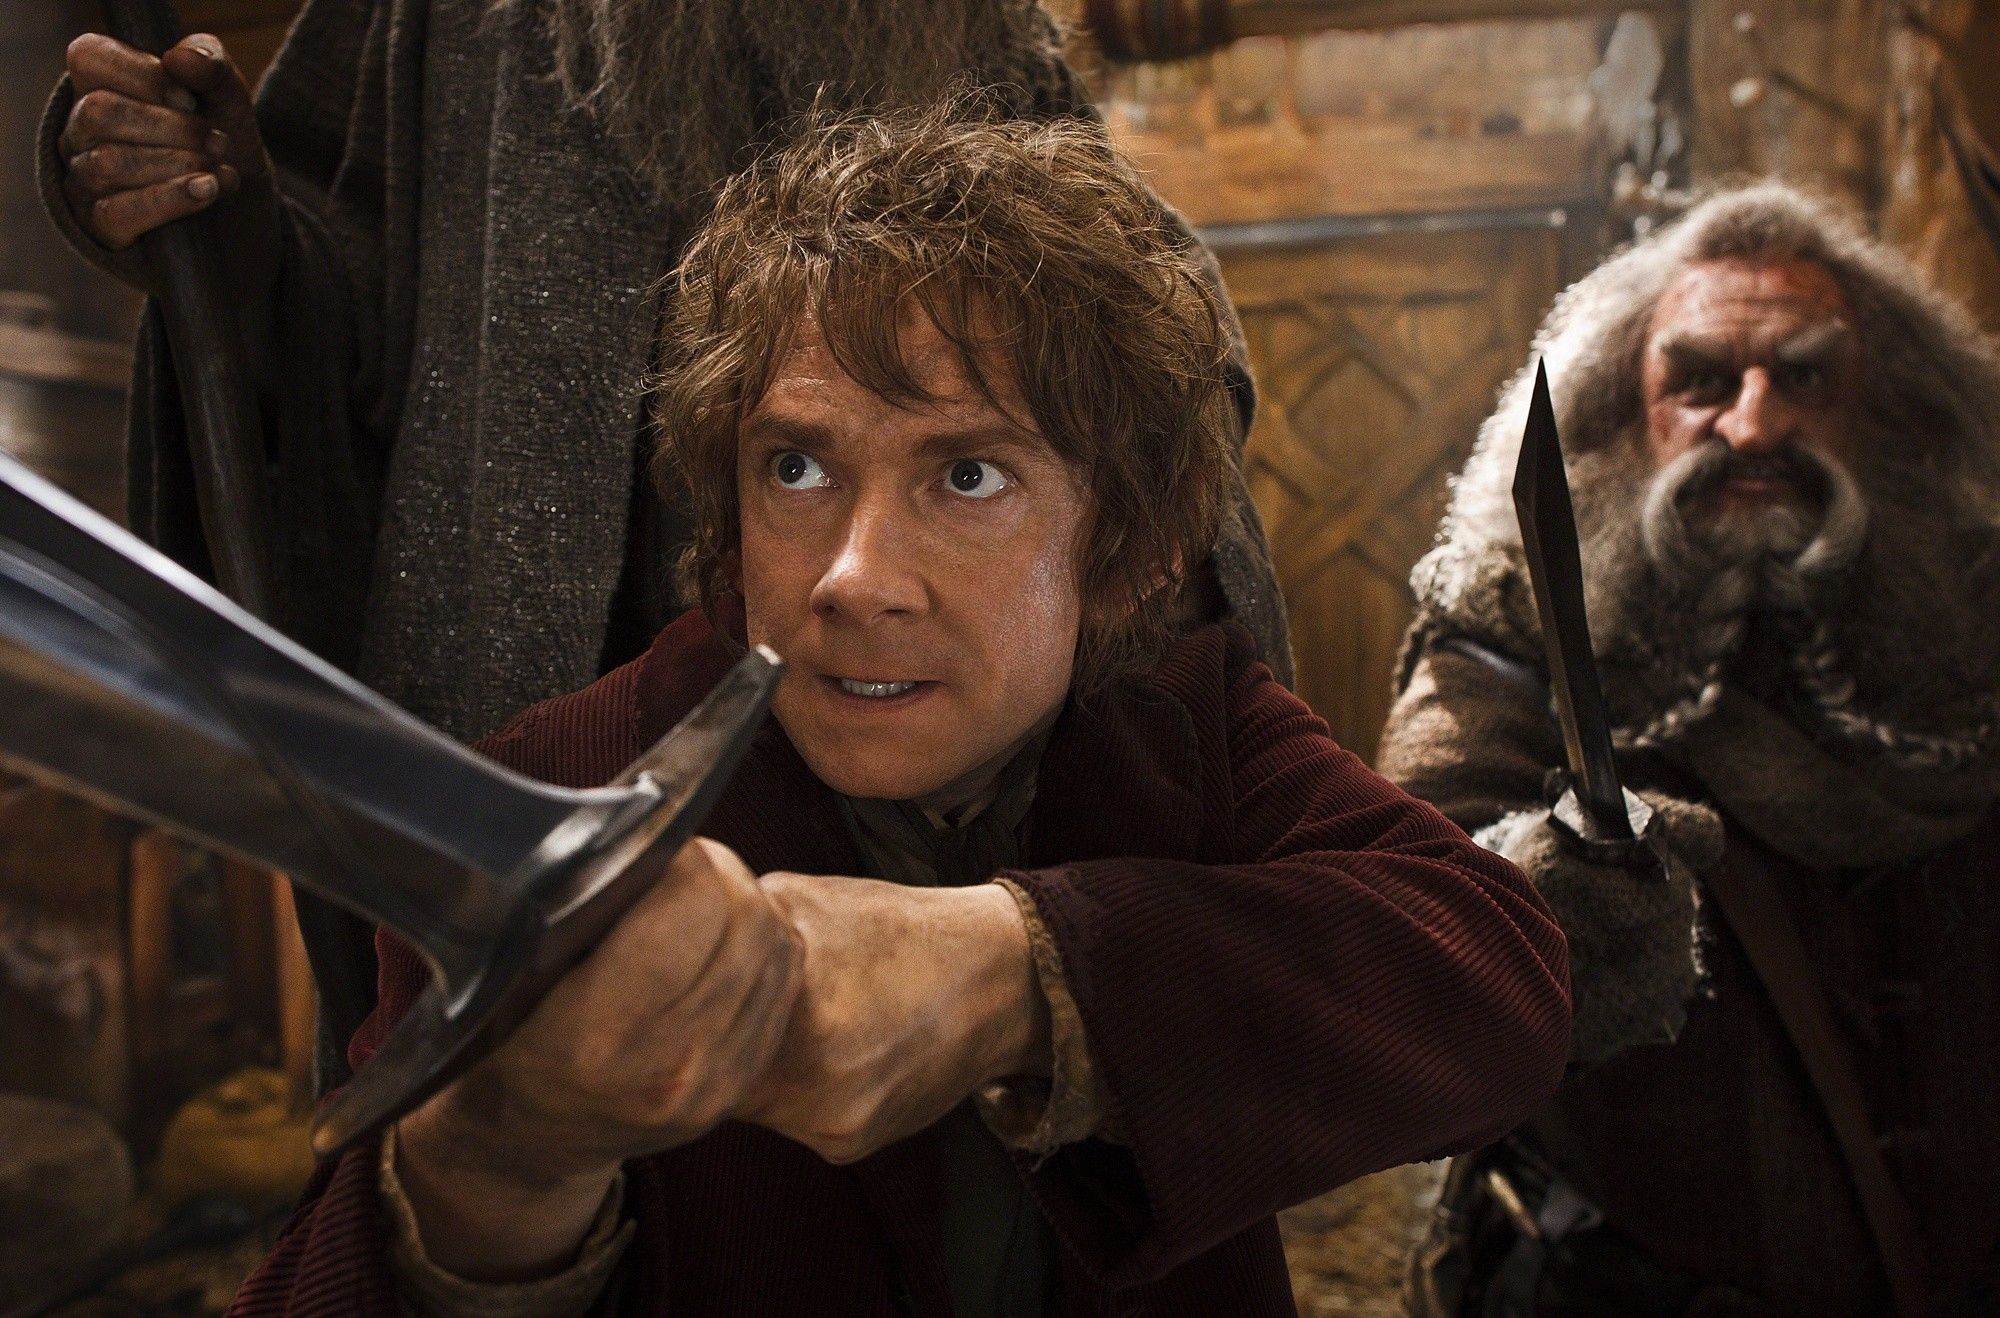 Martin Freeman stars as Bilbo Baggins and John Callen stars as Oin in Warner Bros. Pictures' The Hobbit: The Desolation of Smaug (2013)